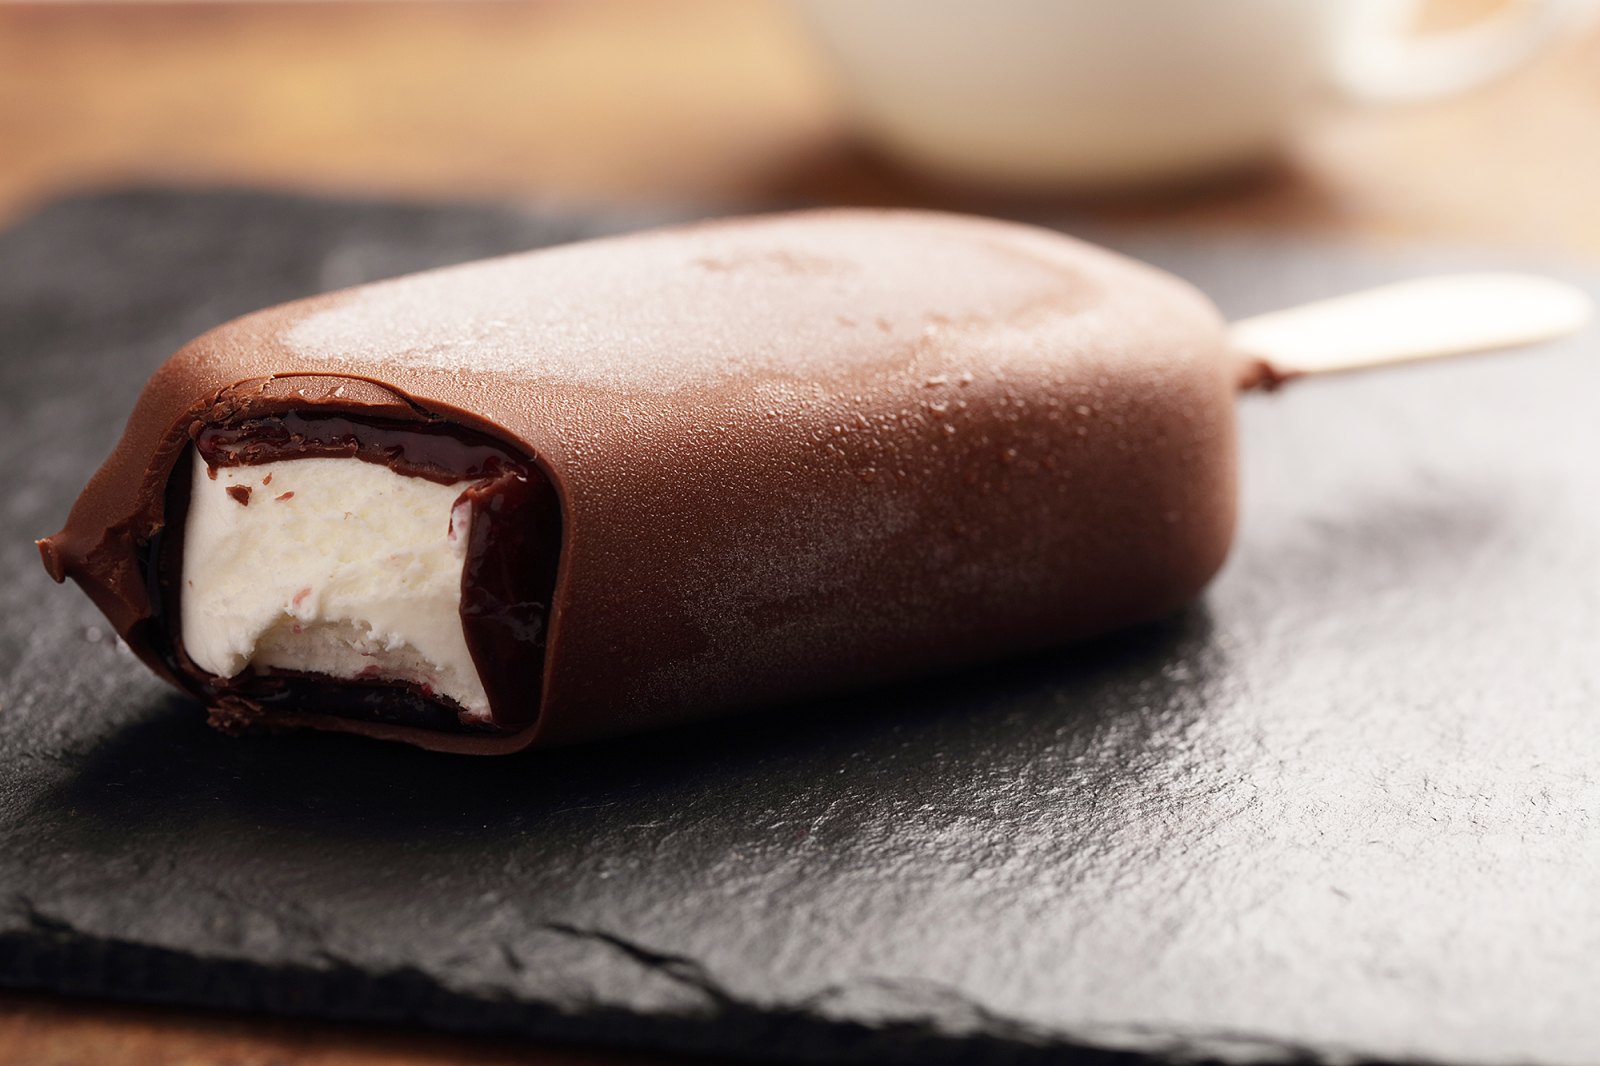 Eskimo Pie Ice Cream Bars Food Brands Step Up to Change Their Racially Insensitive Names